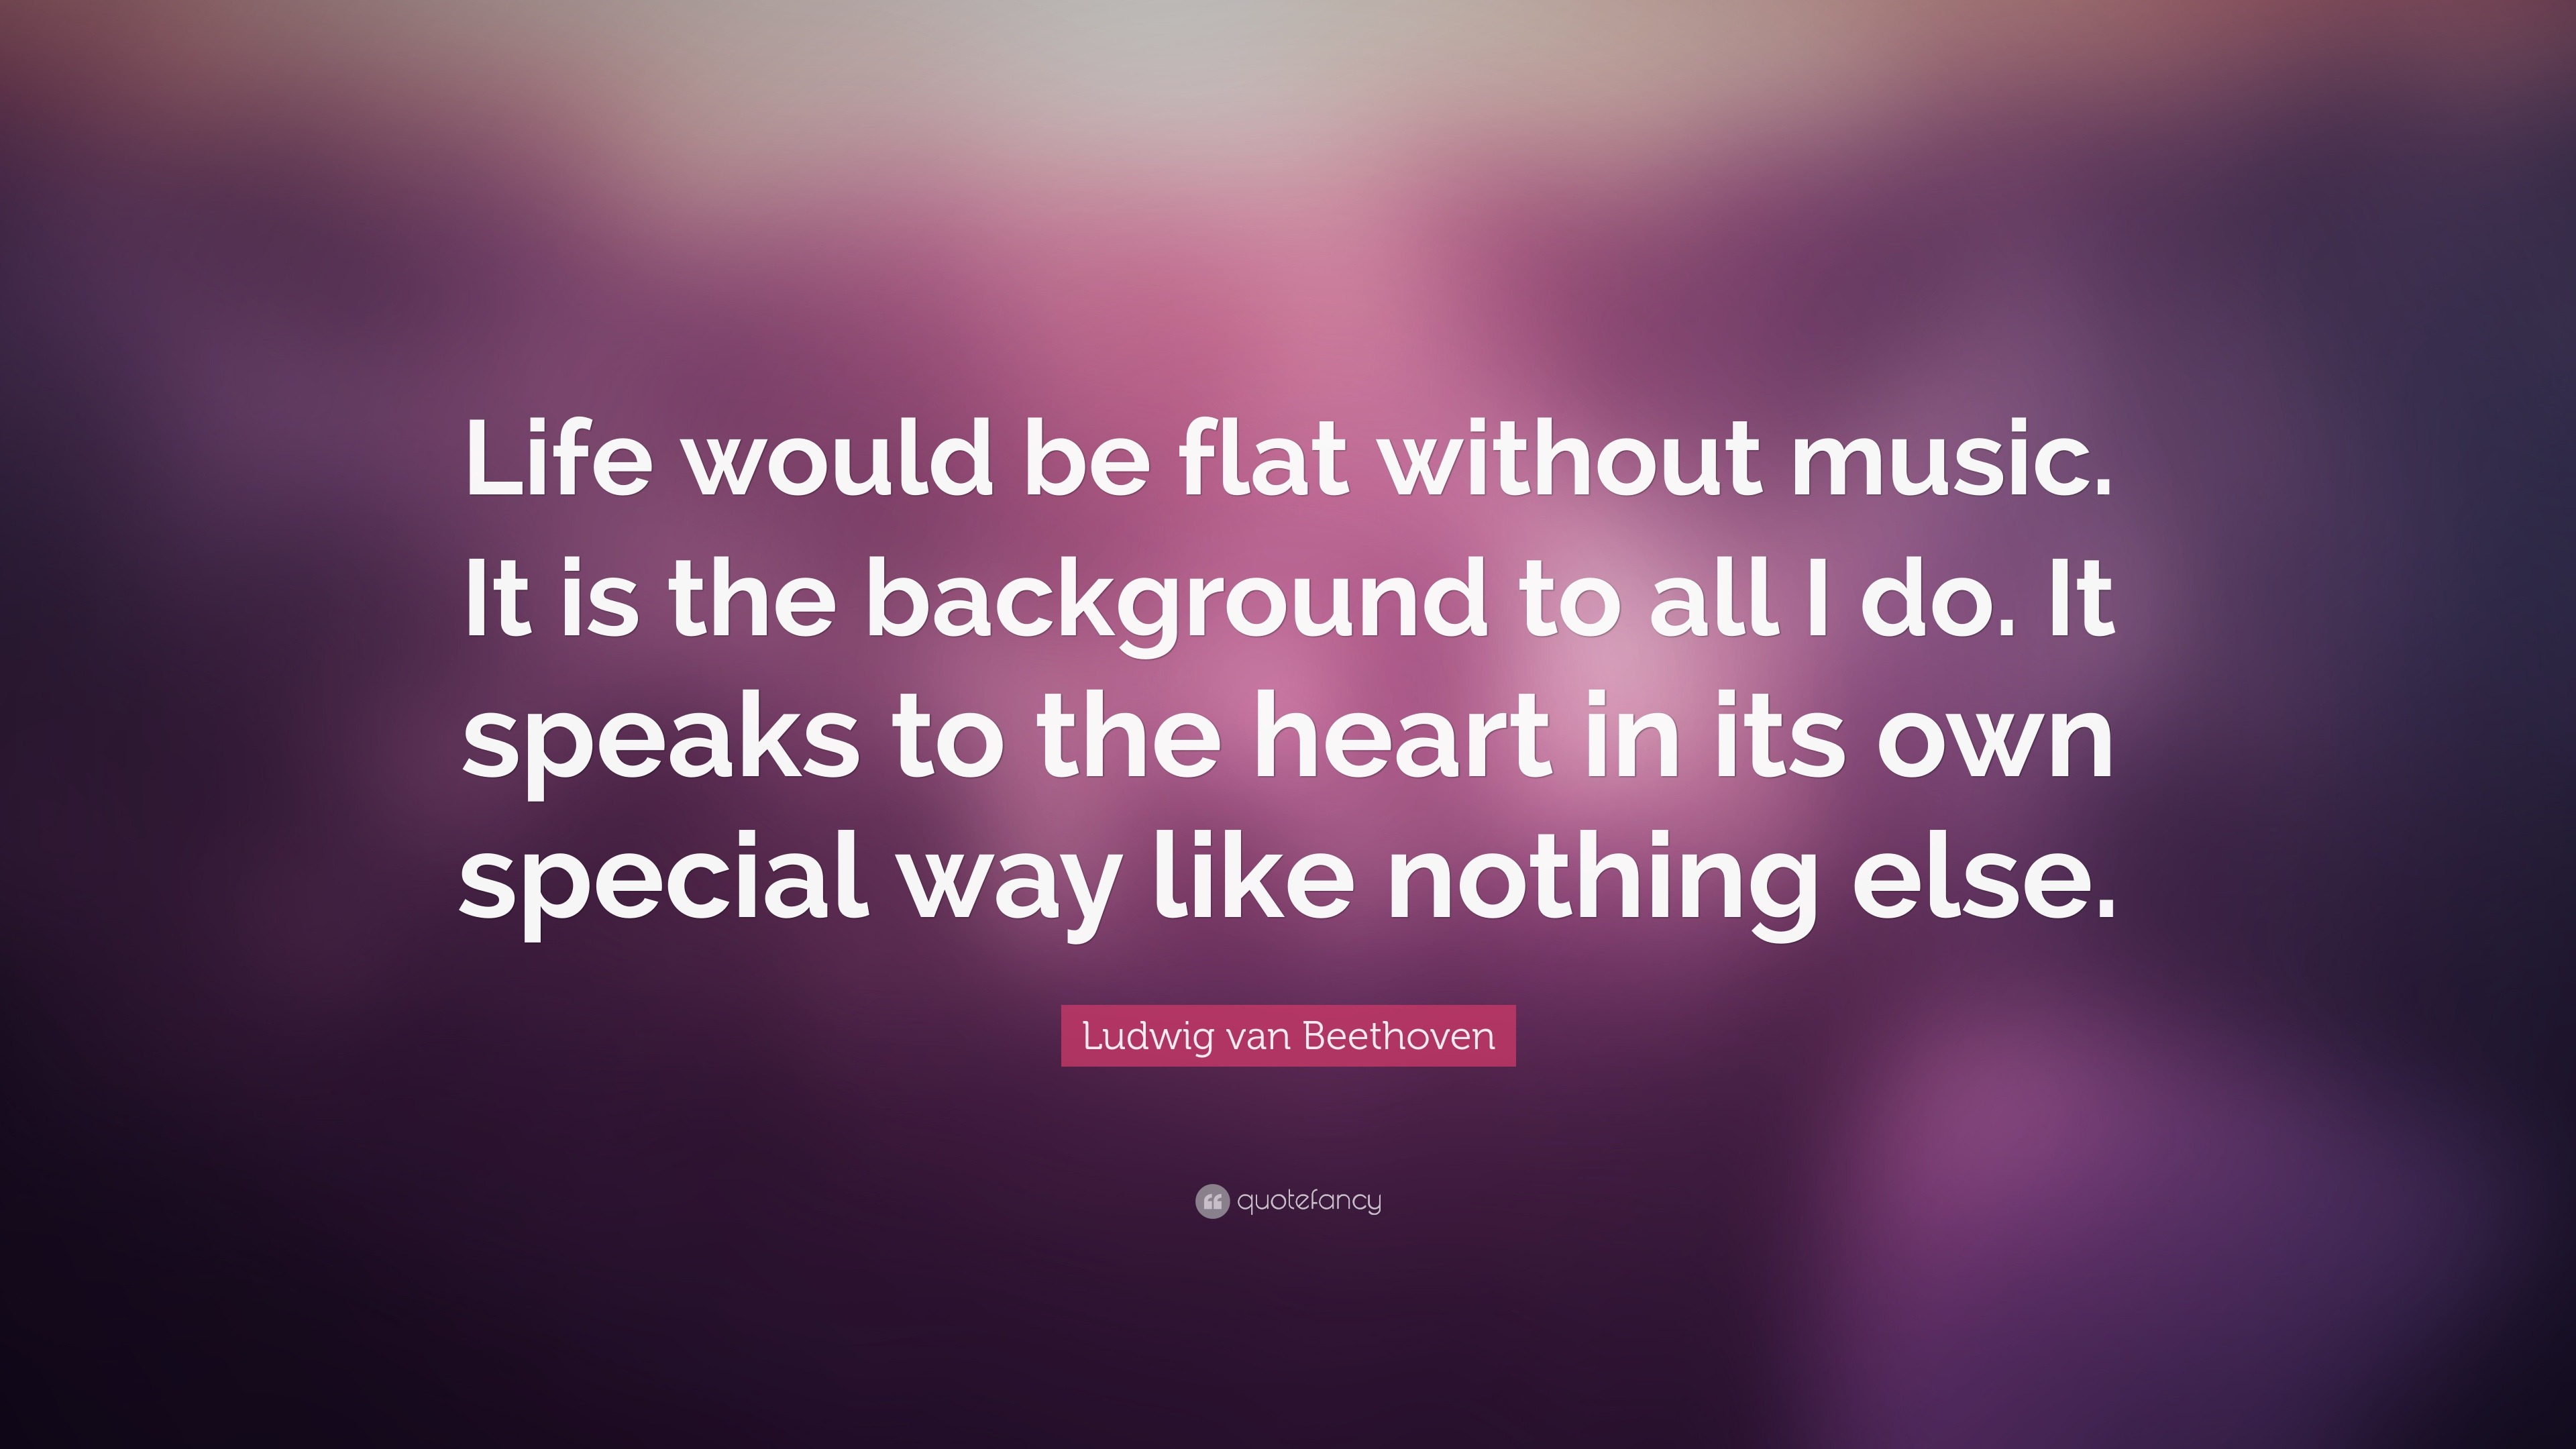 Ludwig van Beethoven Quote: “Life would be flat without music. It is ...